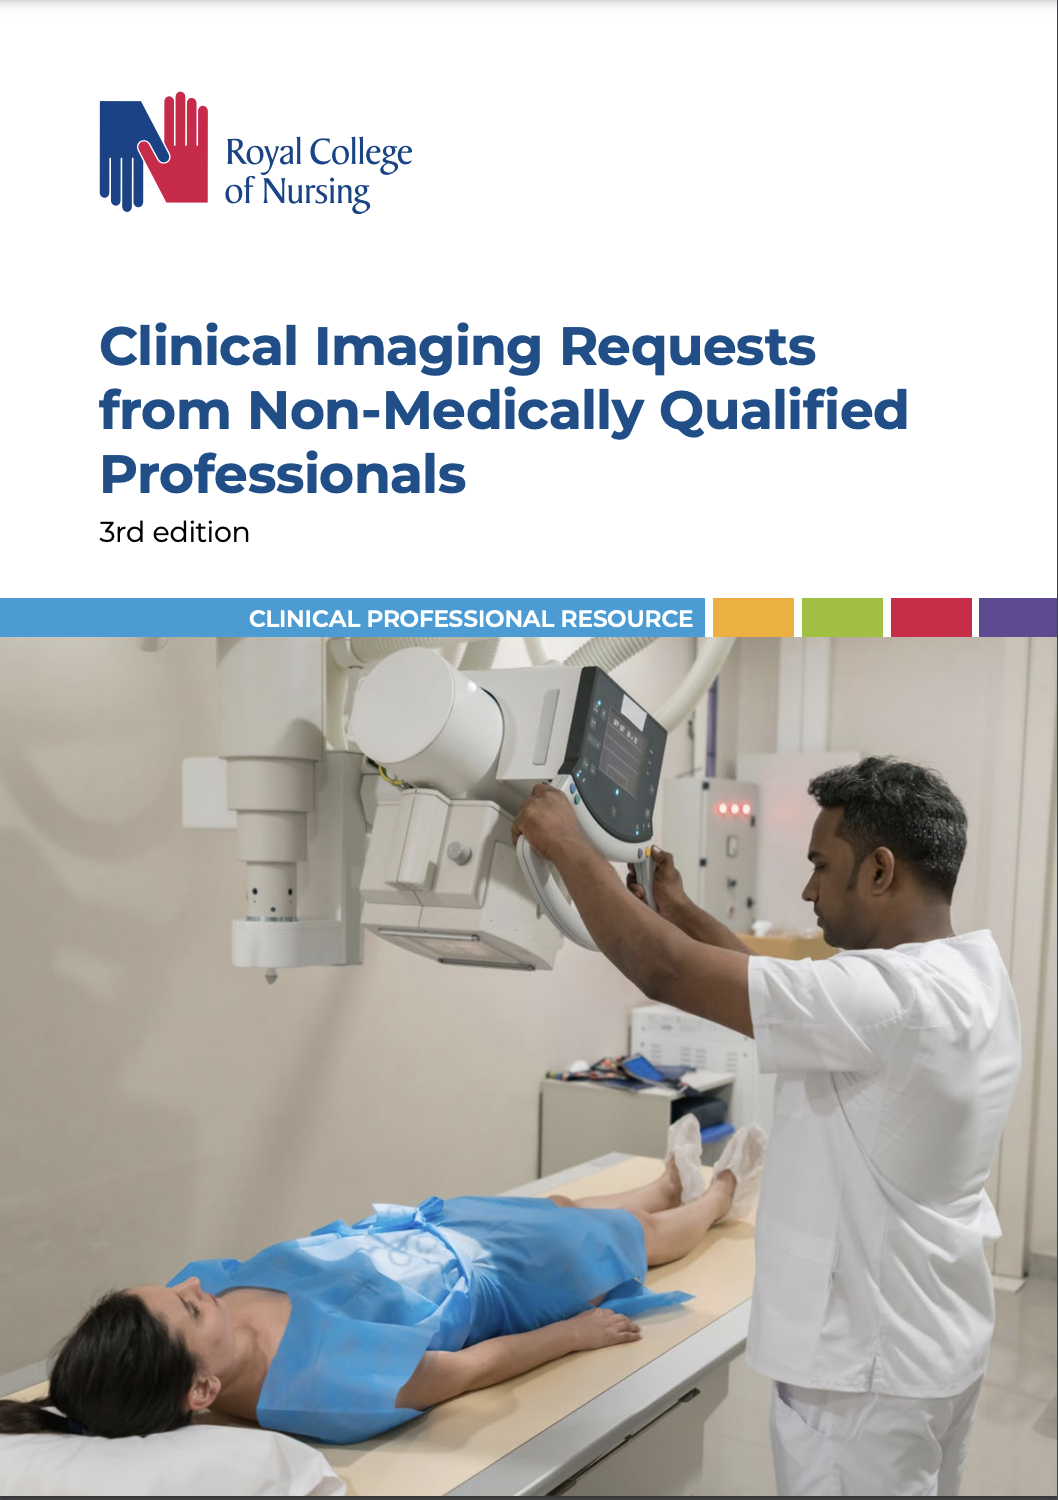 Clinical Imaging Requests from Non-Medically Qualified Professionals (3rd Edition)